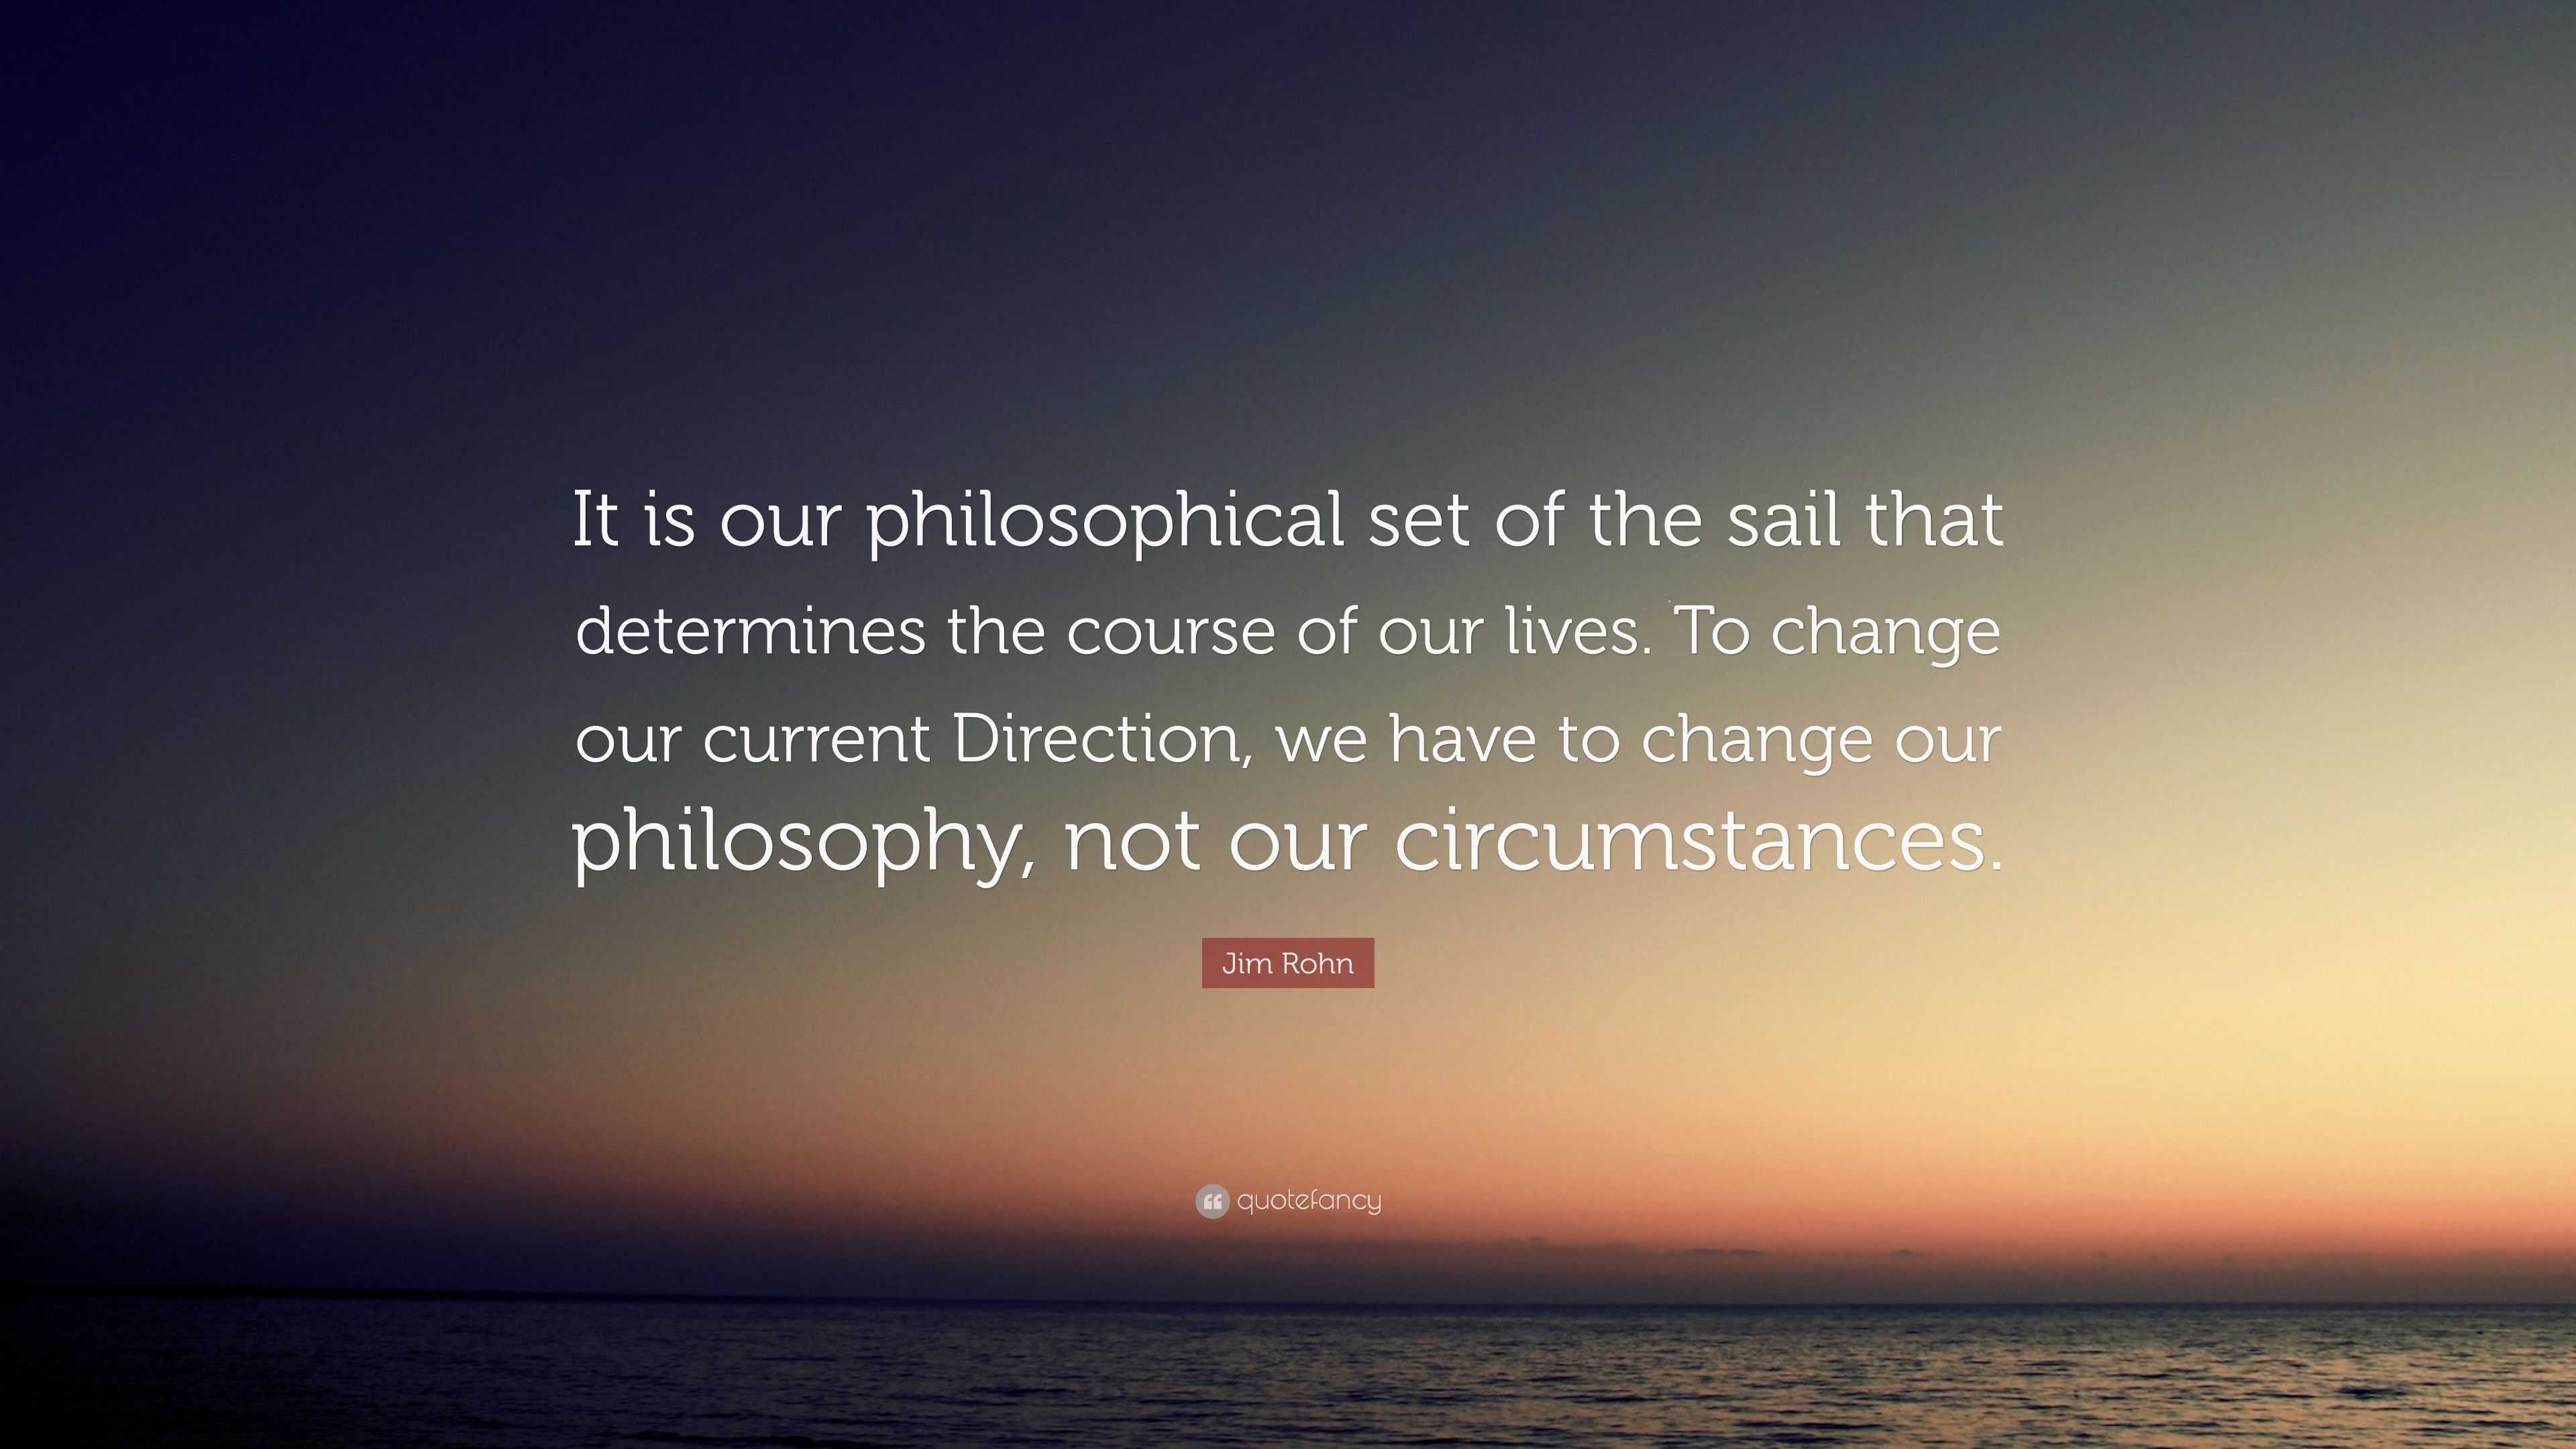 Jim Rohn Quote: “It is our philosophical set of the sail that ...